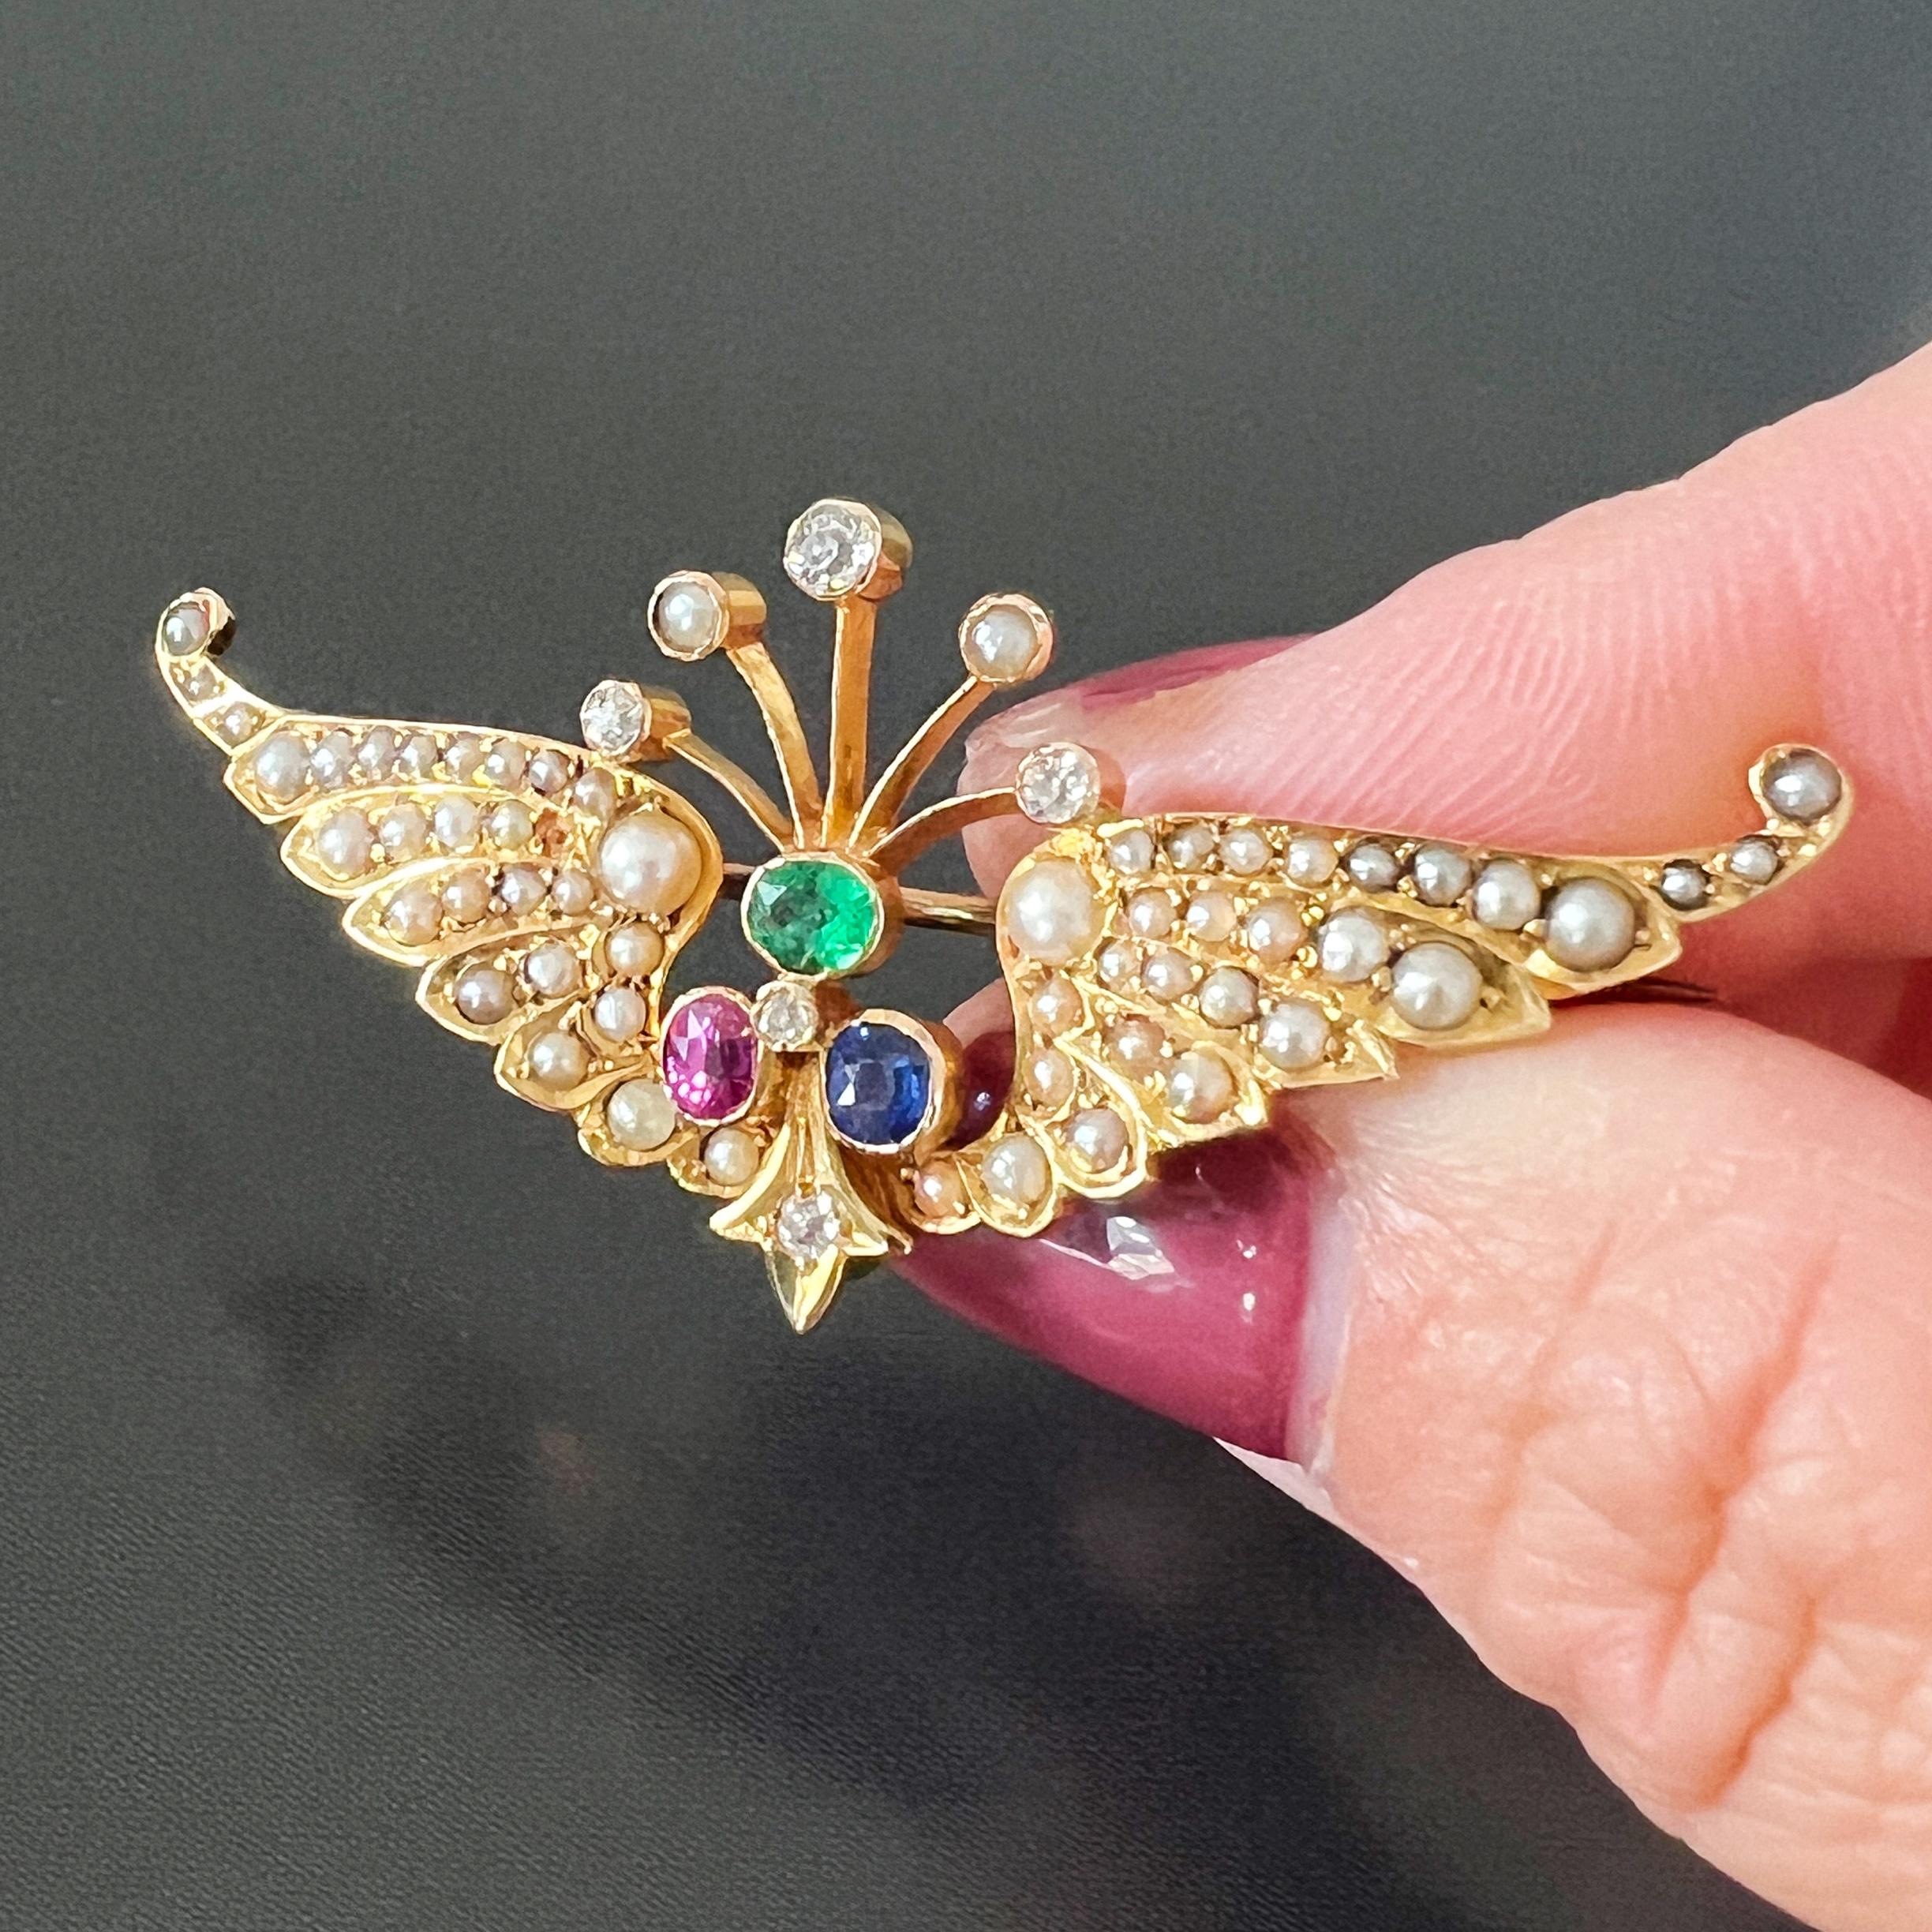 For sale an antique brooch made during the late 19th century, the Victorian era. It features a pair of wings made of 14K yellow gold. The wings are intricately designed and fully set with seed pearls, imitating the white color of the feathered